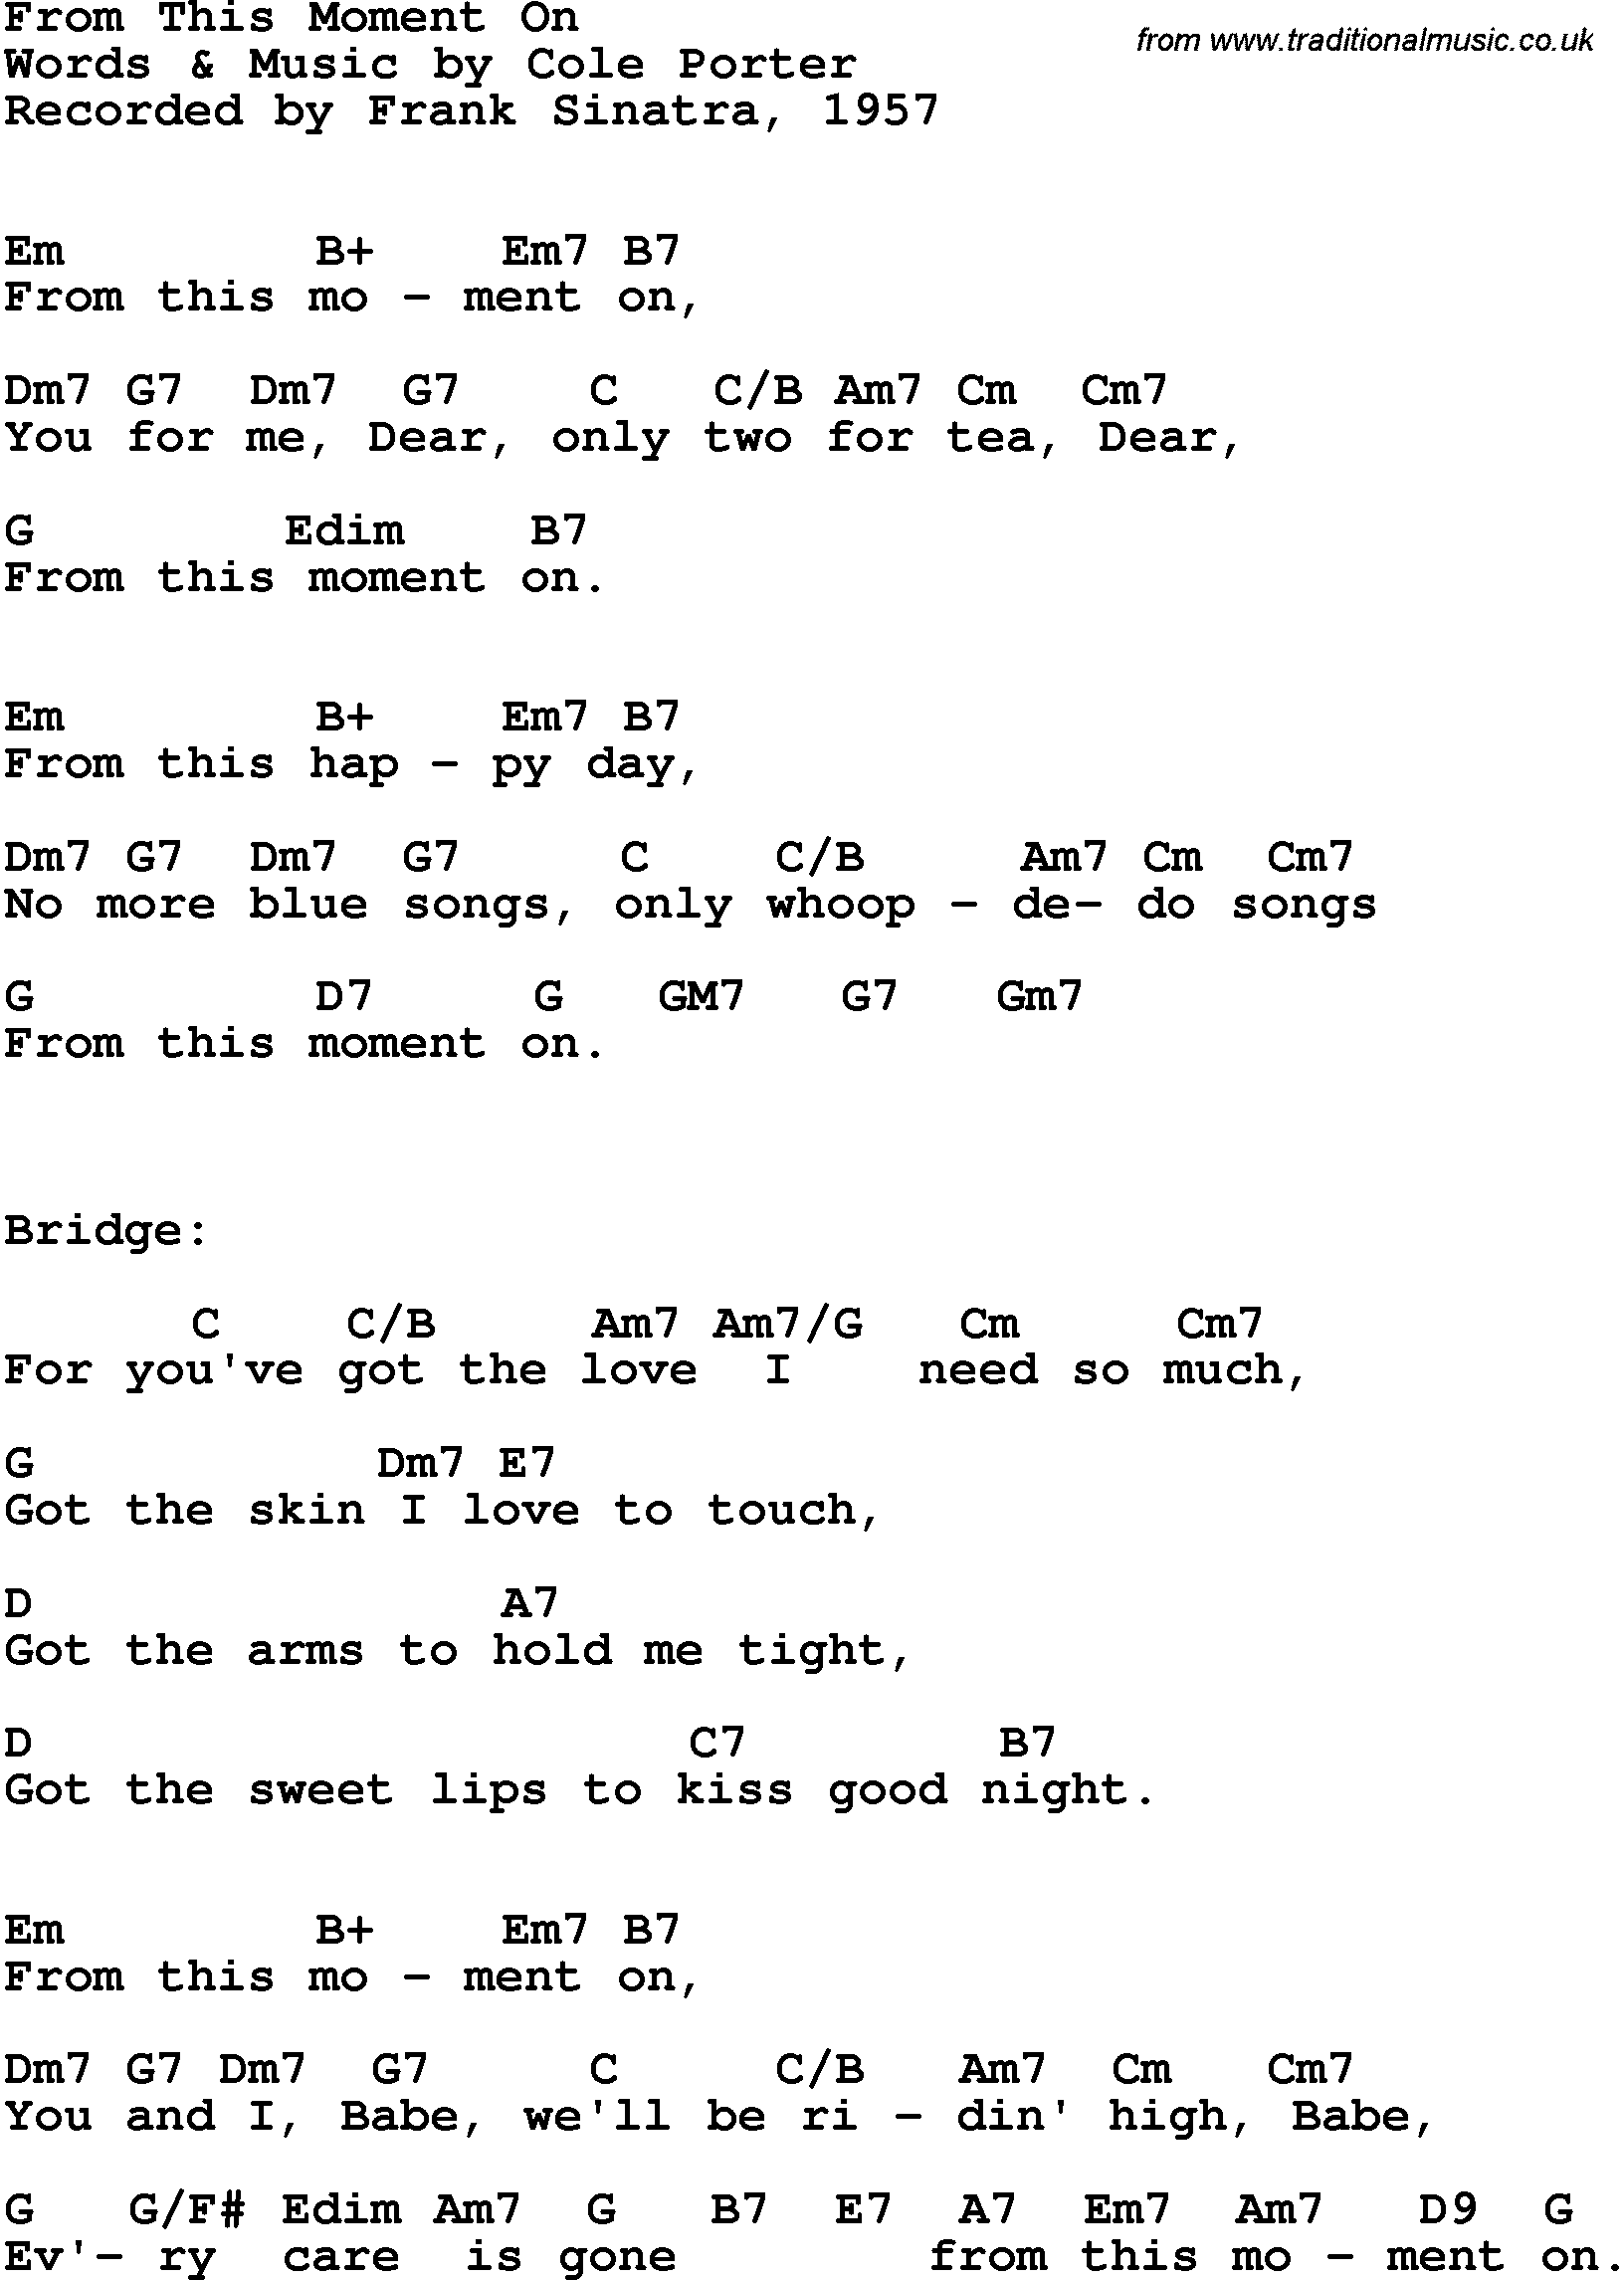 Song Lyrics with guitar chords for From This Moment On - Frank Sinatra, 1957